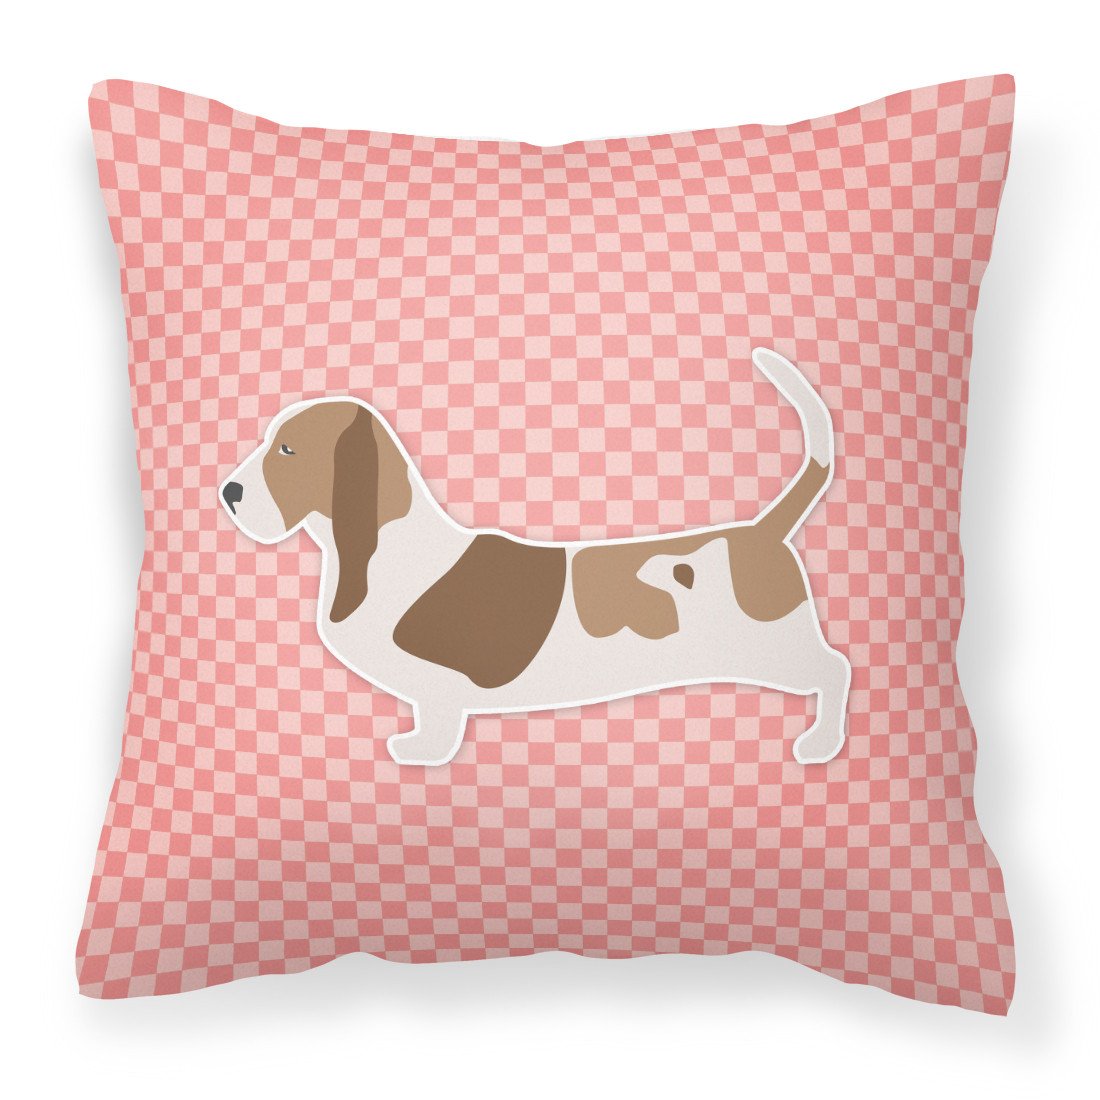 Basset Hound Checkerboard Pink Fabric Decorative Pillow BB3602PW1818 by Caroline's Treasures